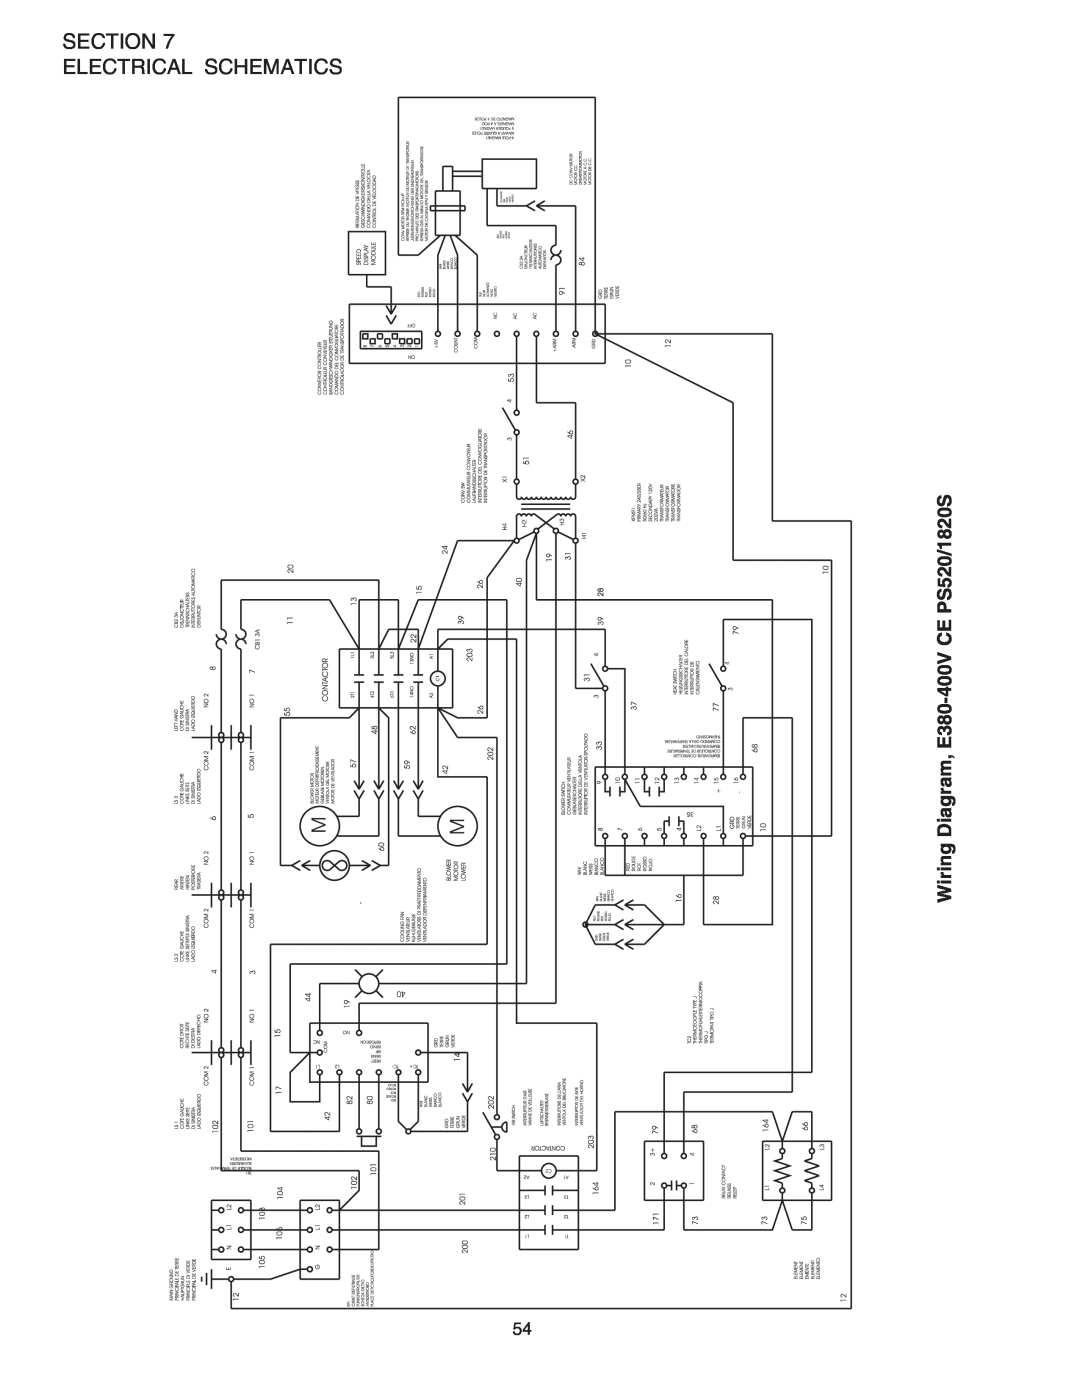 Middleby Marshall installation manual Section Electrical Schematics, Wiring Diagram, E380-400VCE PS520/1820S 